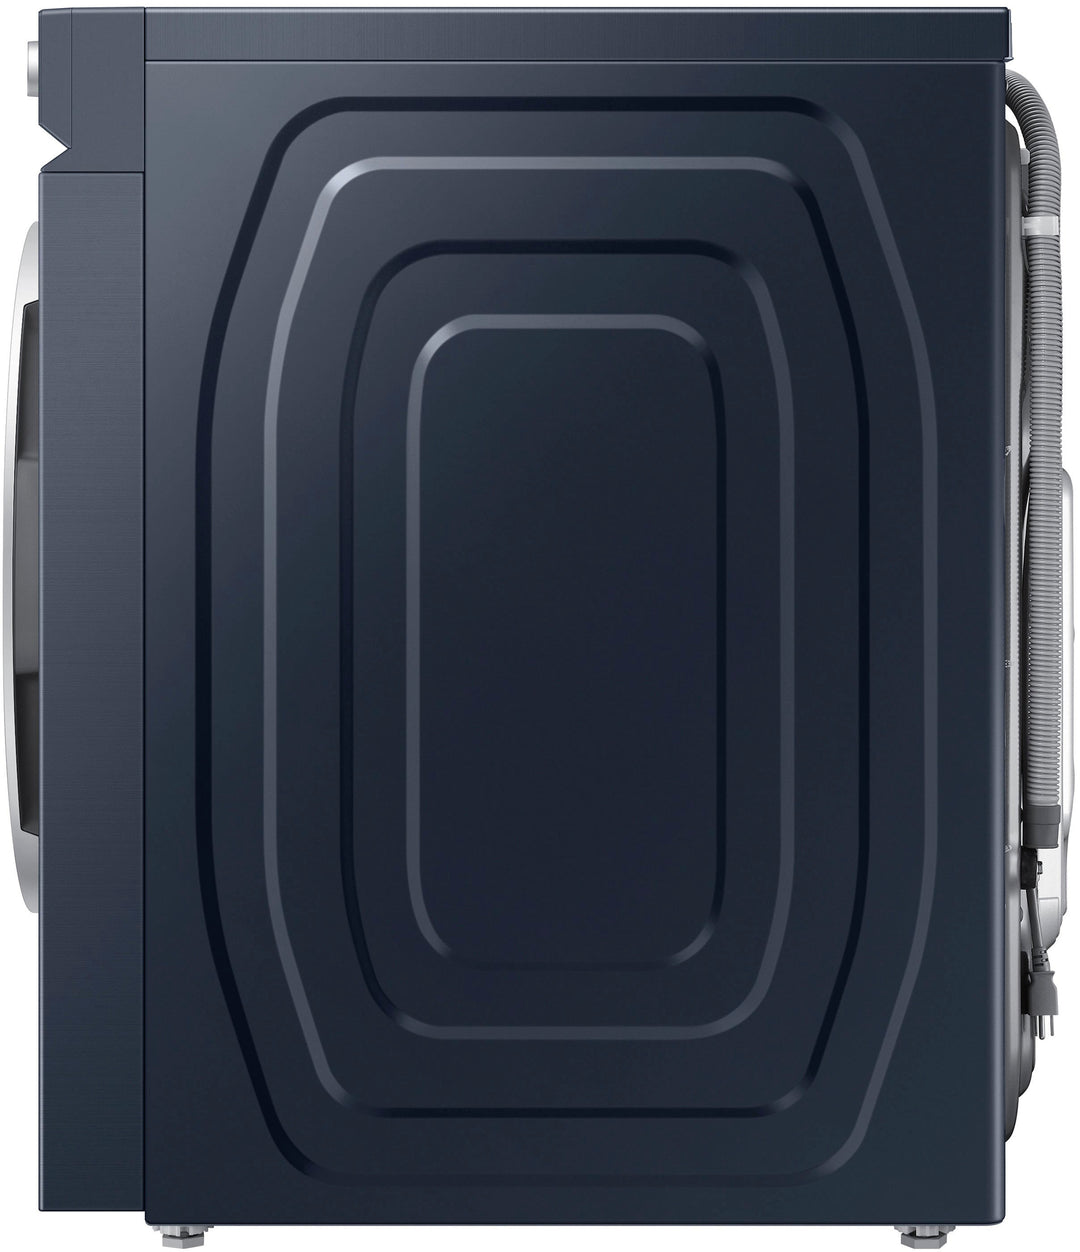 Samsung - Bespoke 5.3 cu. ft. Ultra Capacity Front Load Washer with AI OptiWash and Auto Dispense - Brushed navy_6